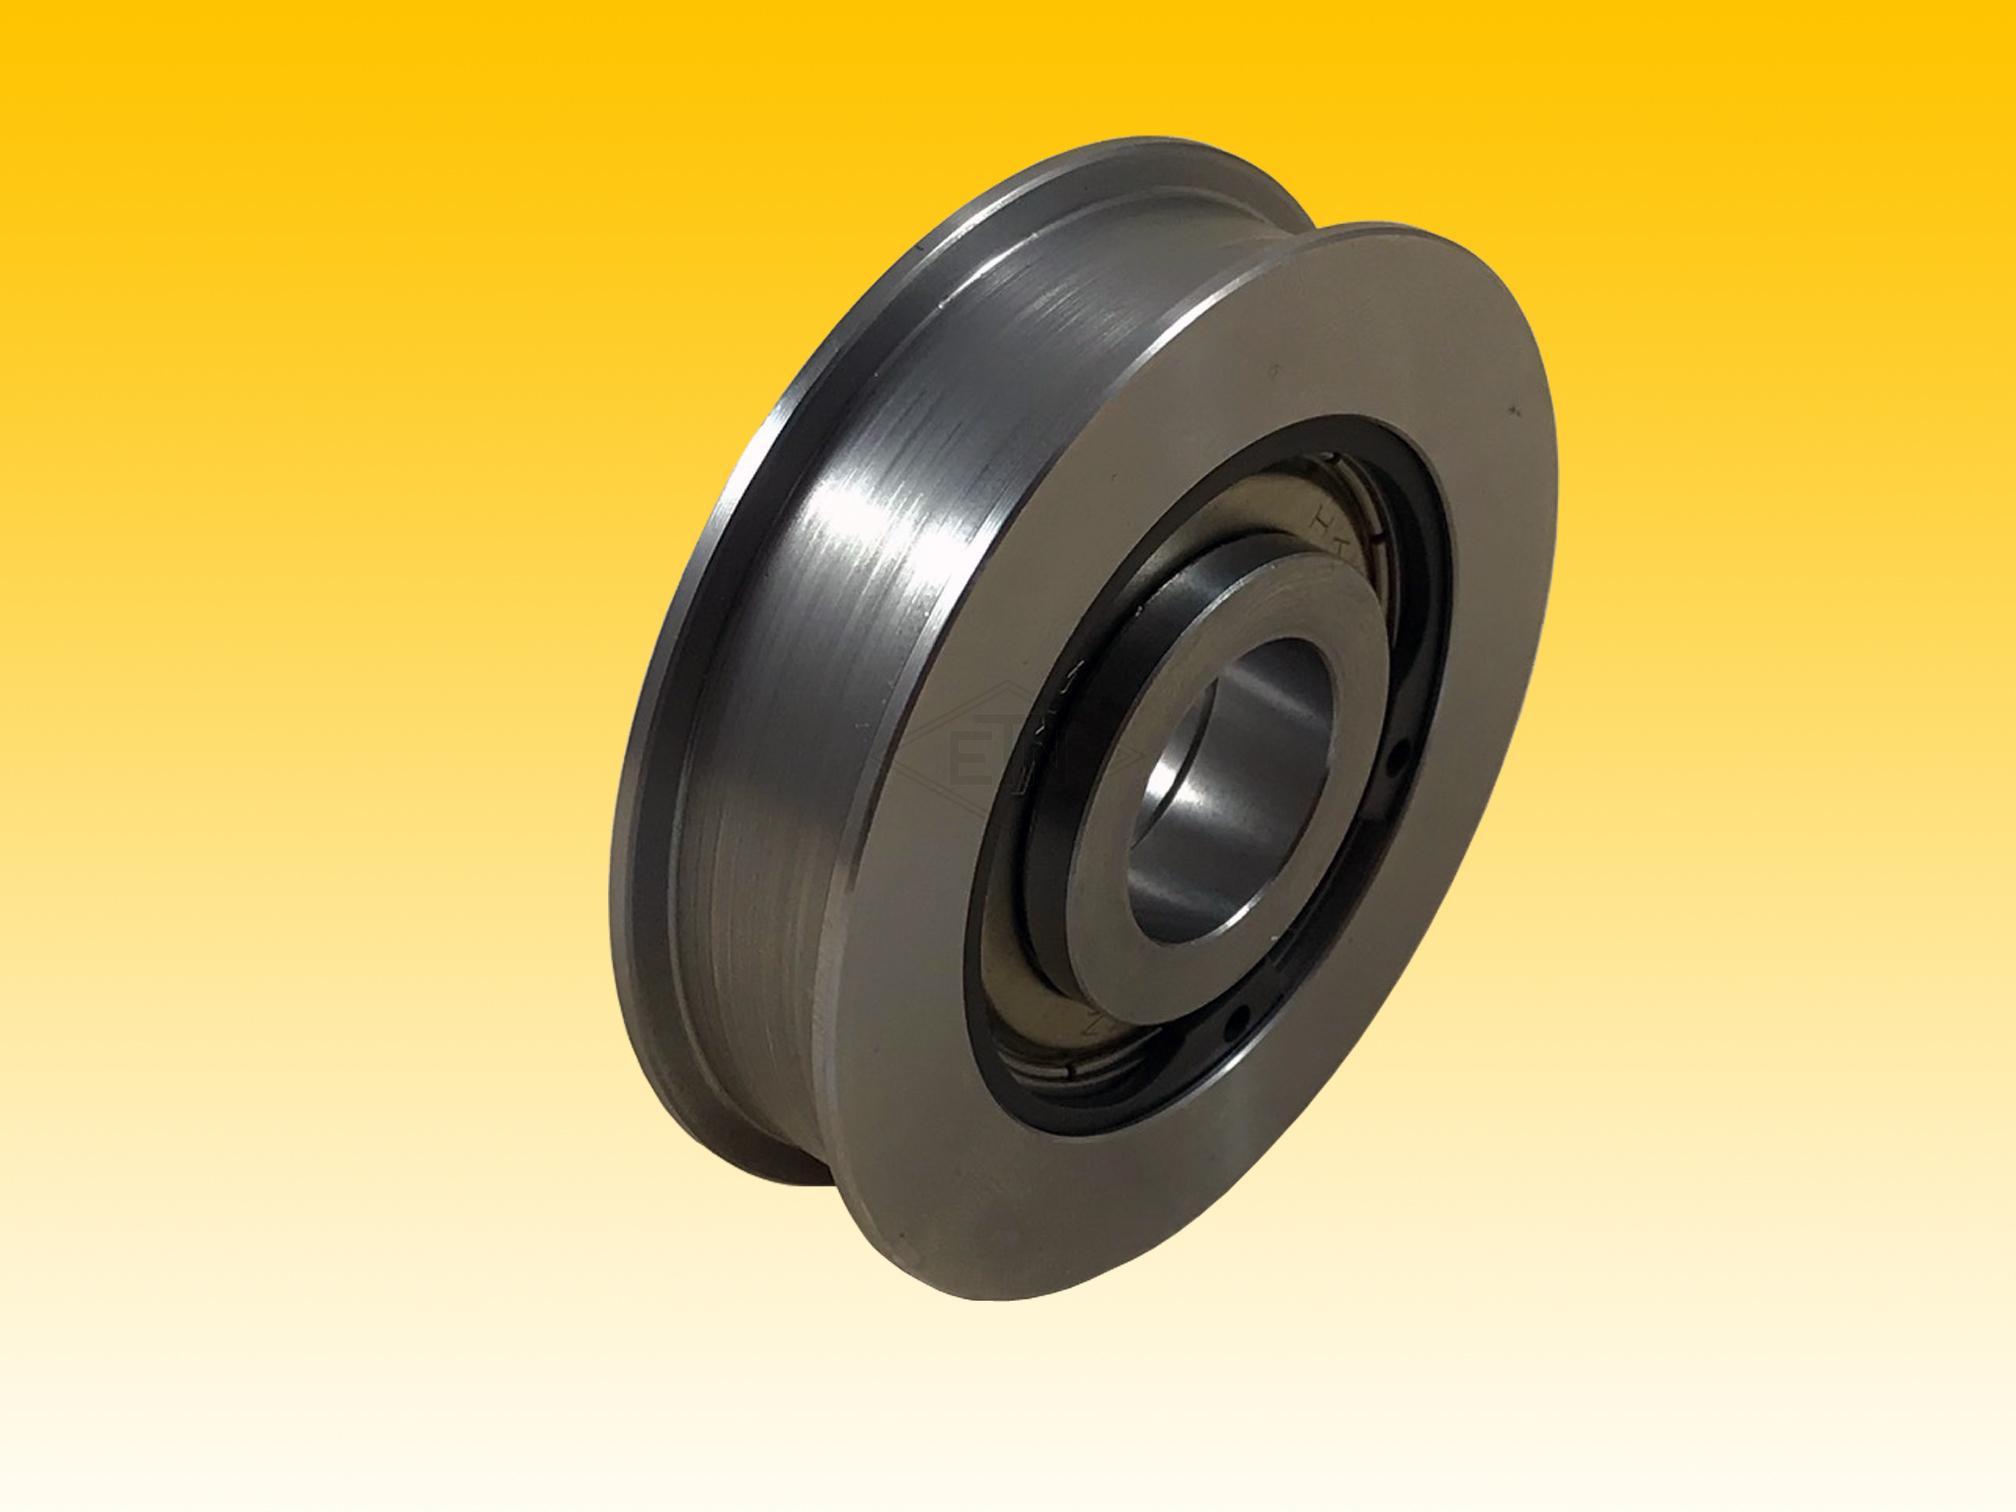 Door roller steel ø 70/63,5/20 x 17,5/14 mm, ball bearing 6005 ZZ, with 2 bushes, clamping lenght 19,4 mm